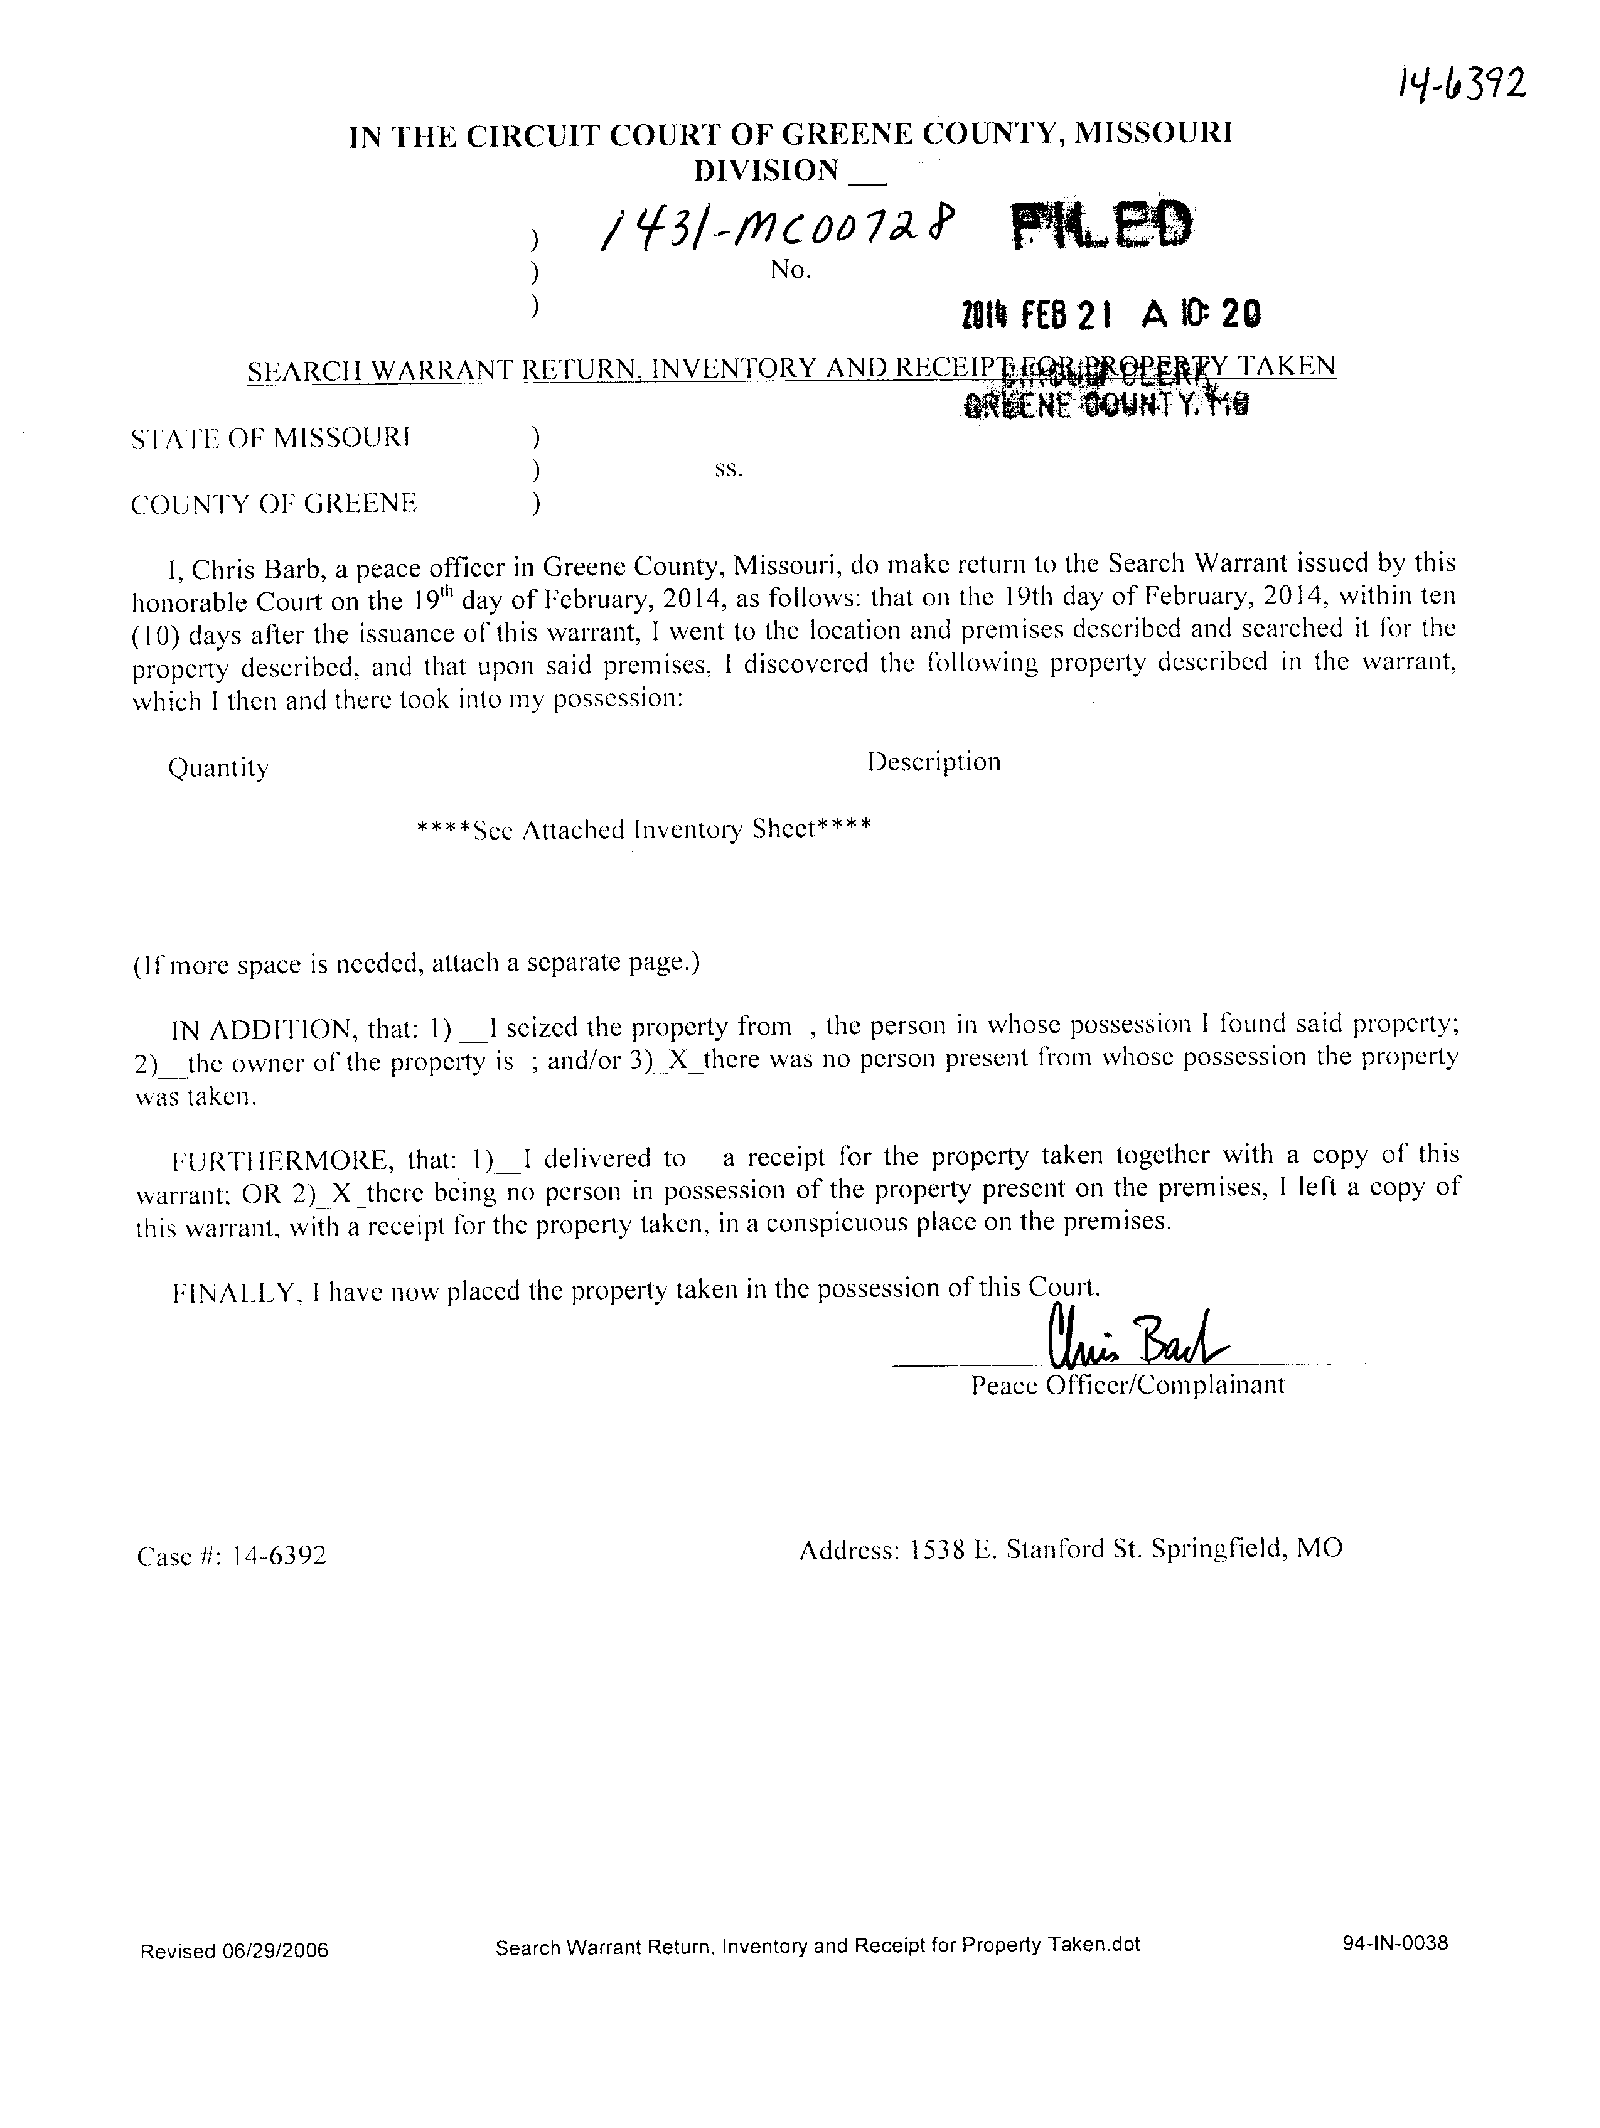 Copy of Search Warrant Return01.png